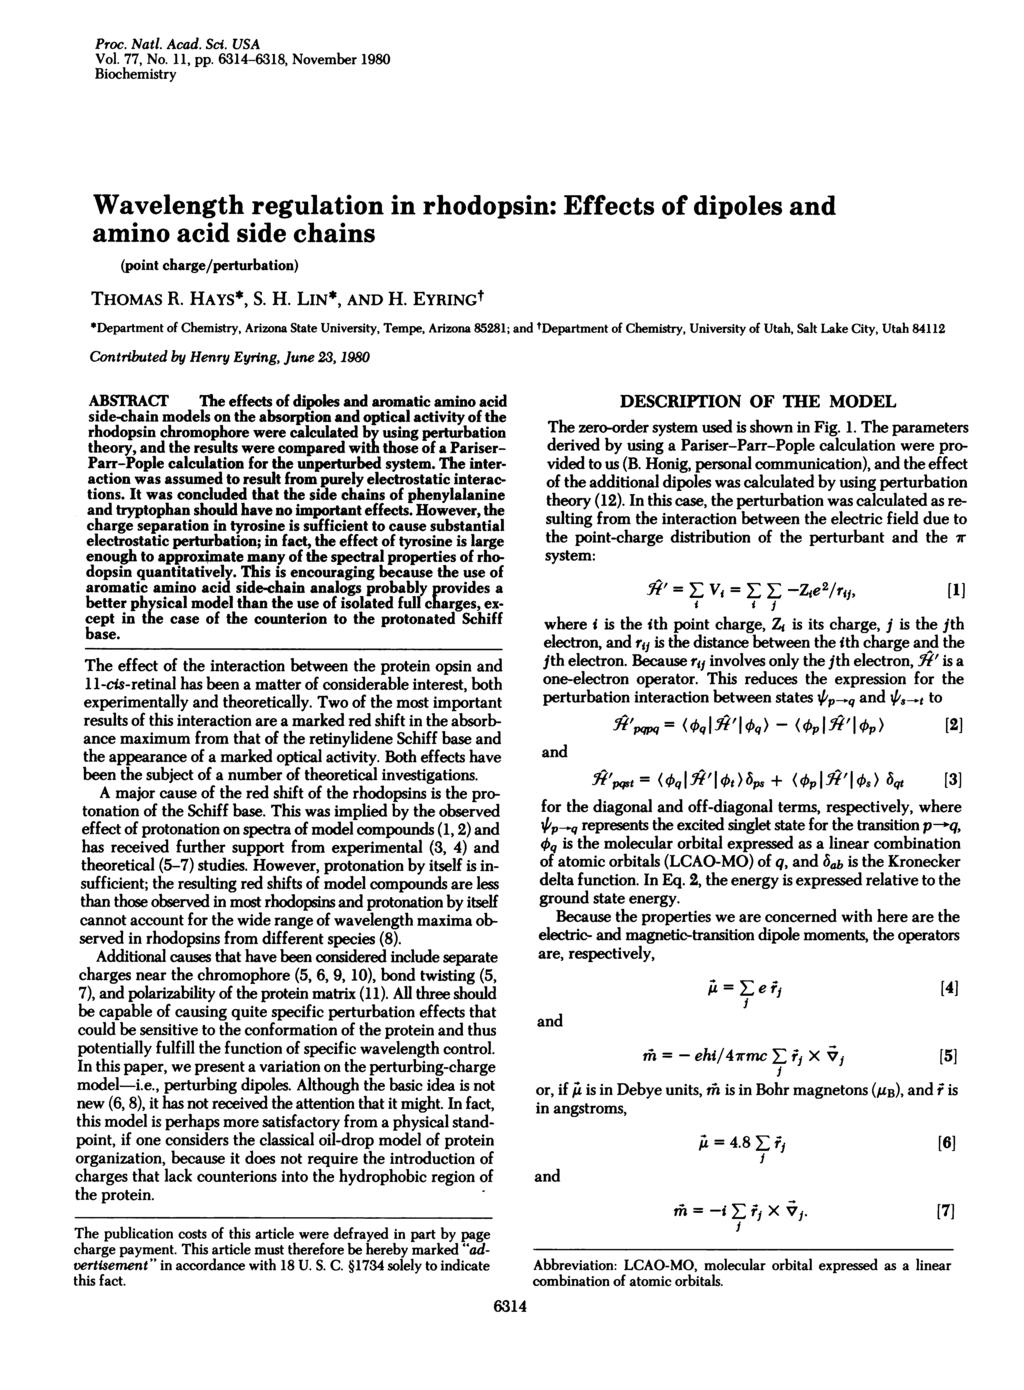 Proc. Nati. Acad. Sci. USA Vol. 77, No. 11, pp. 6314-6318, November 198 Biochemistry Wavelength regulation in rhodopsin: Effects of dipoles amino acid side chains (point charge/perturbation) THOMAS R.